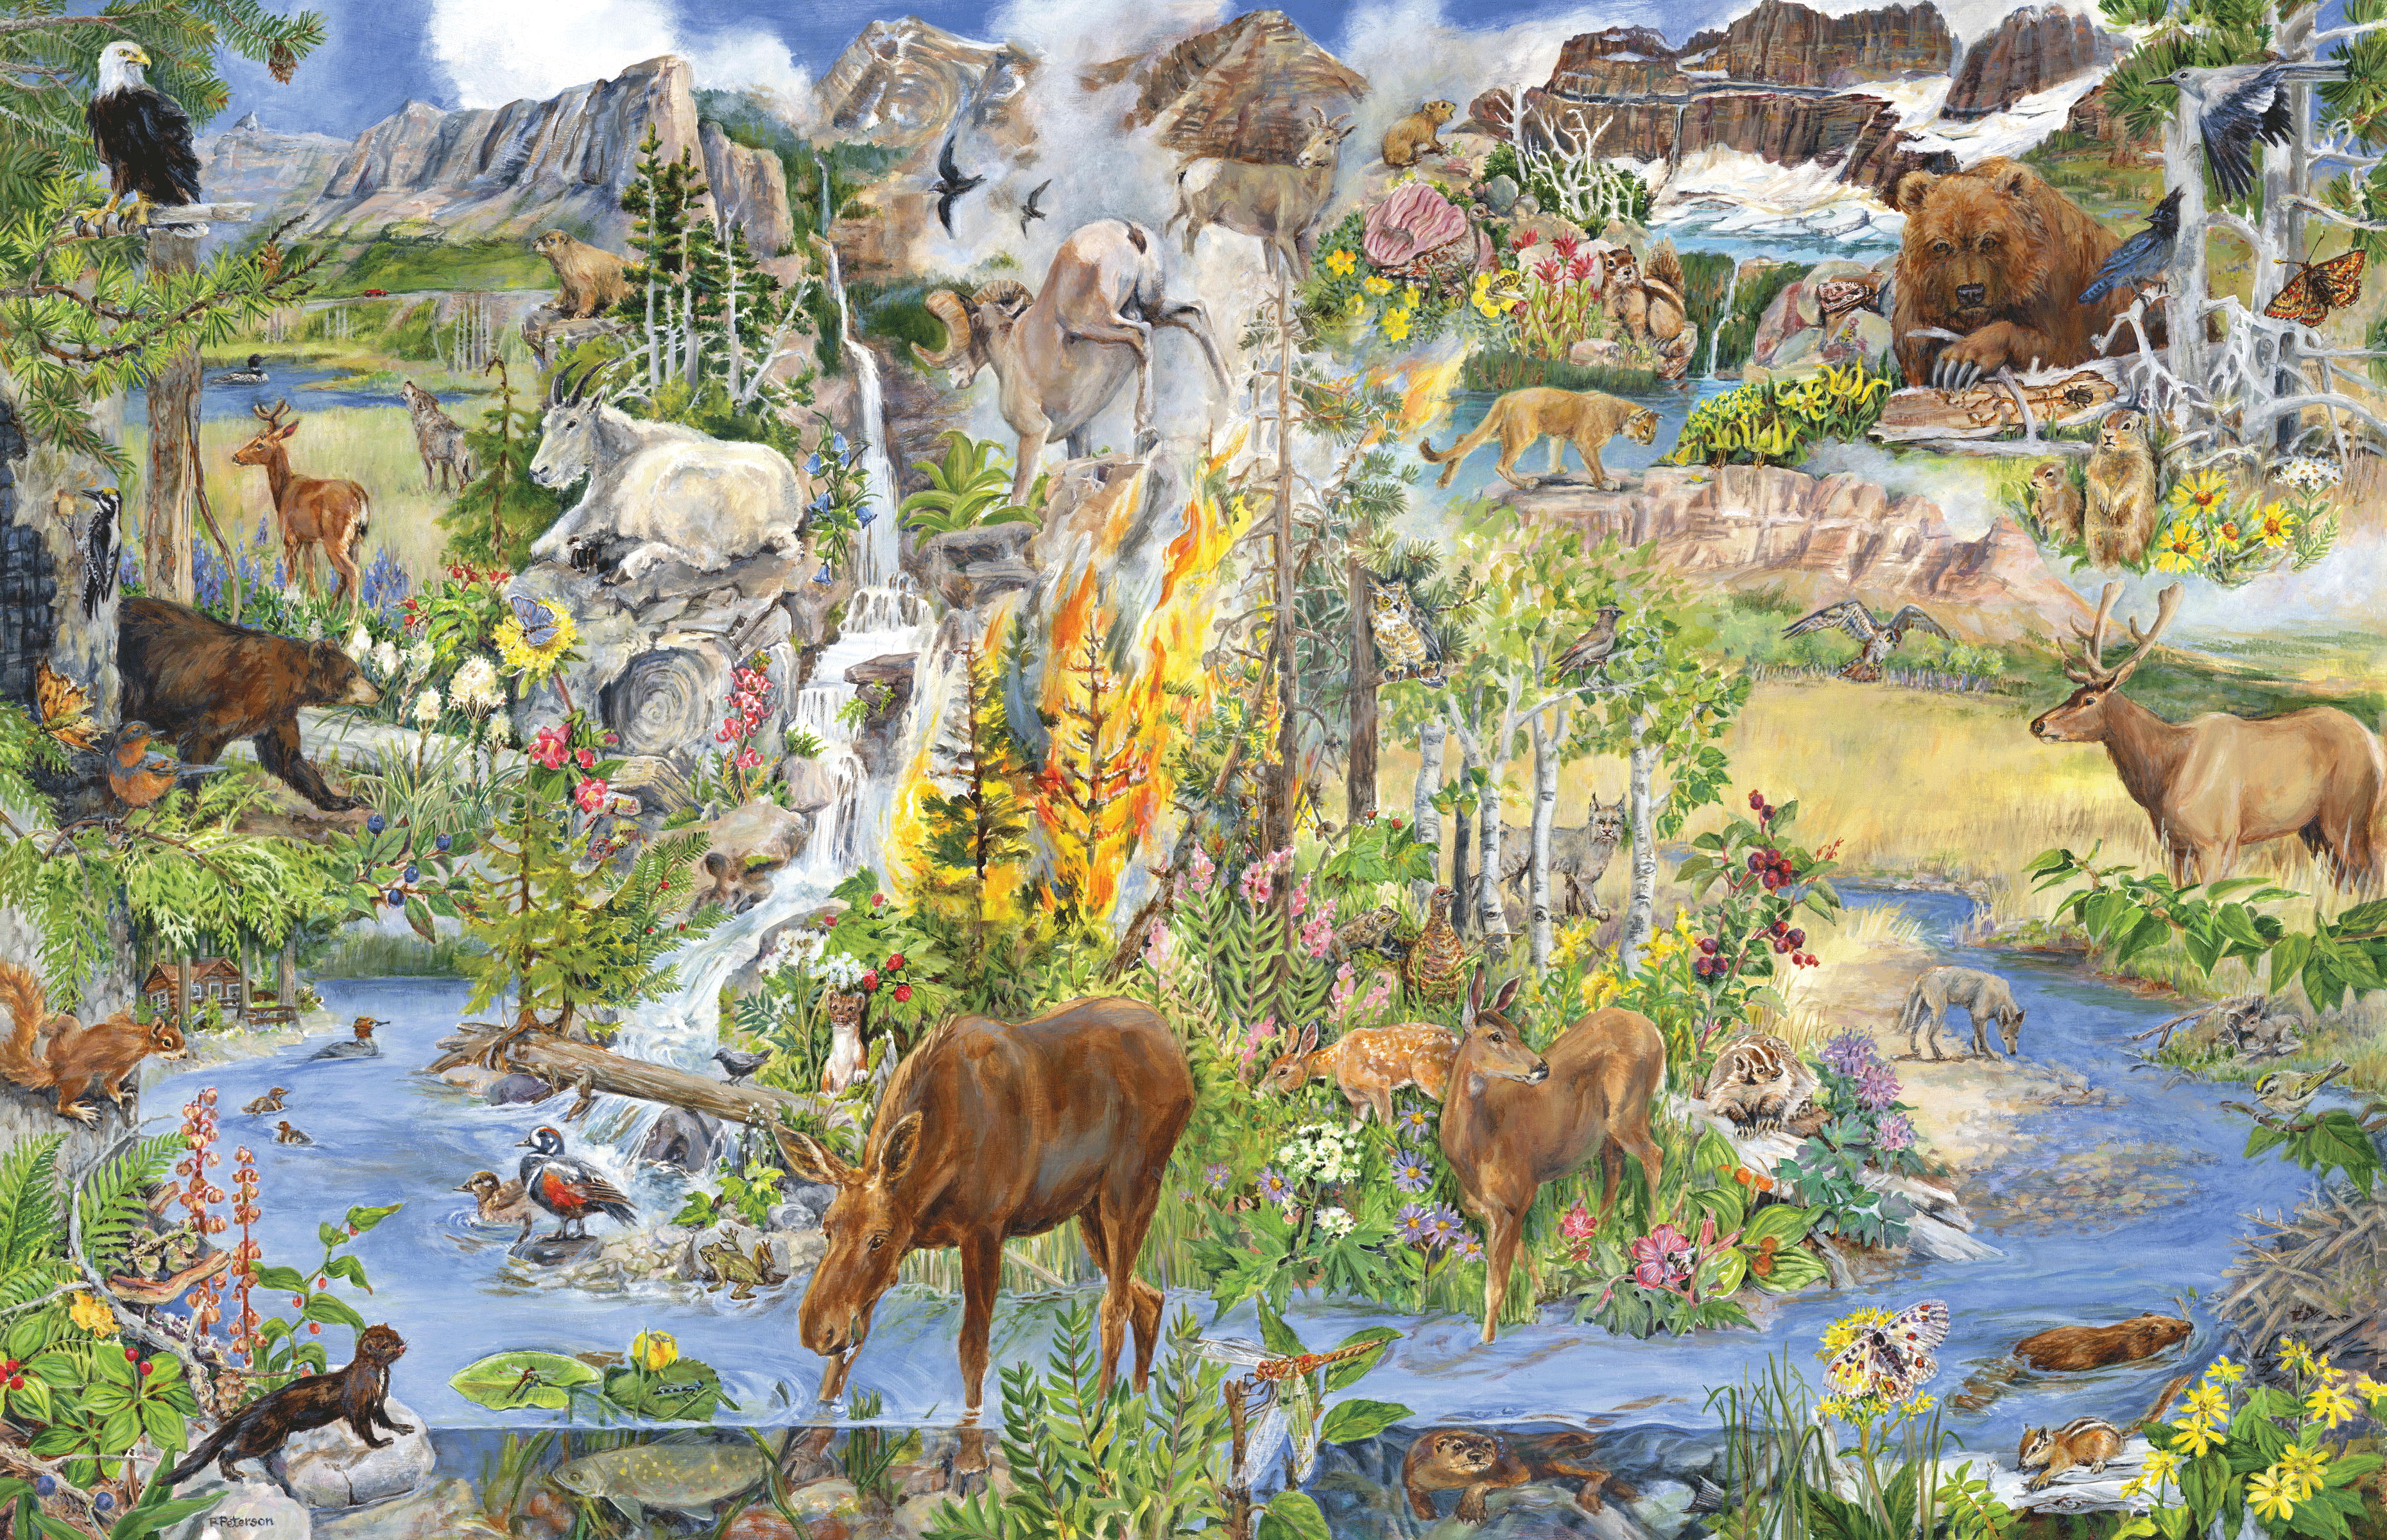 Illustration of wildlife in the park